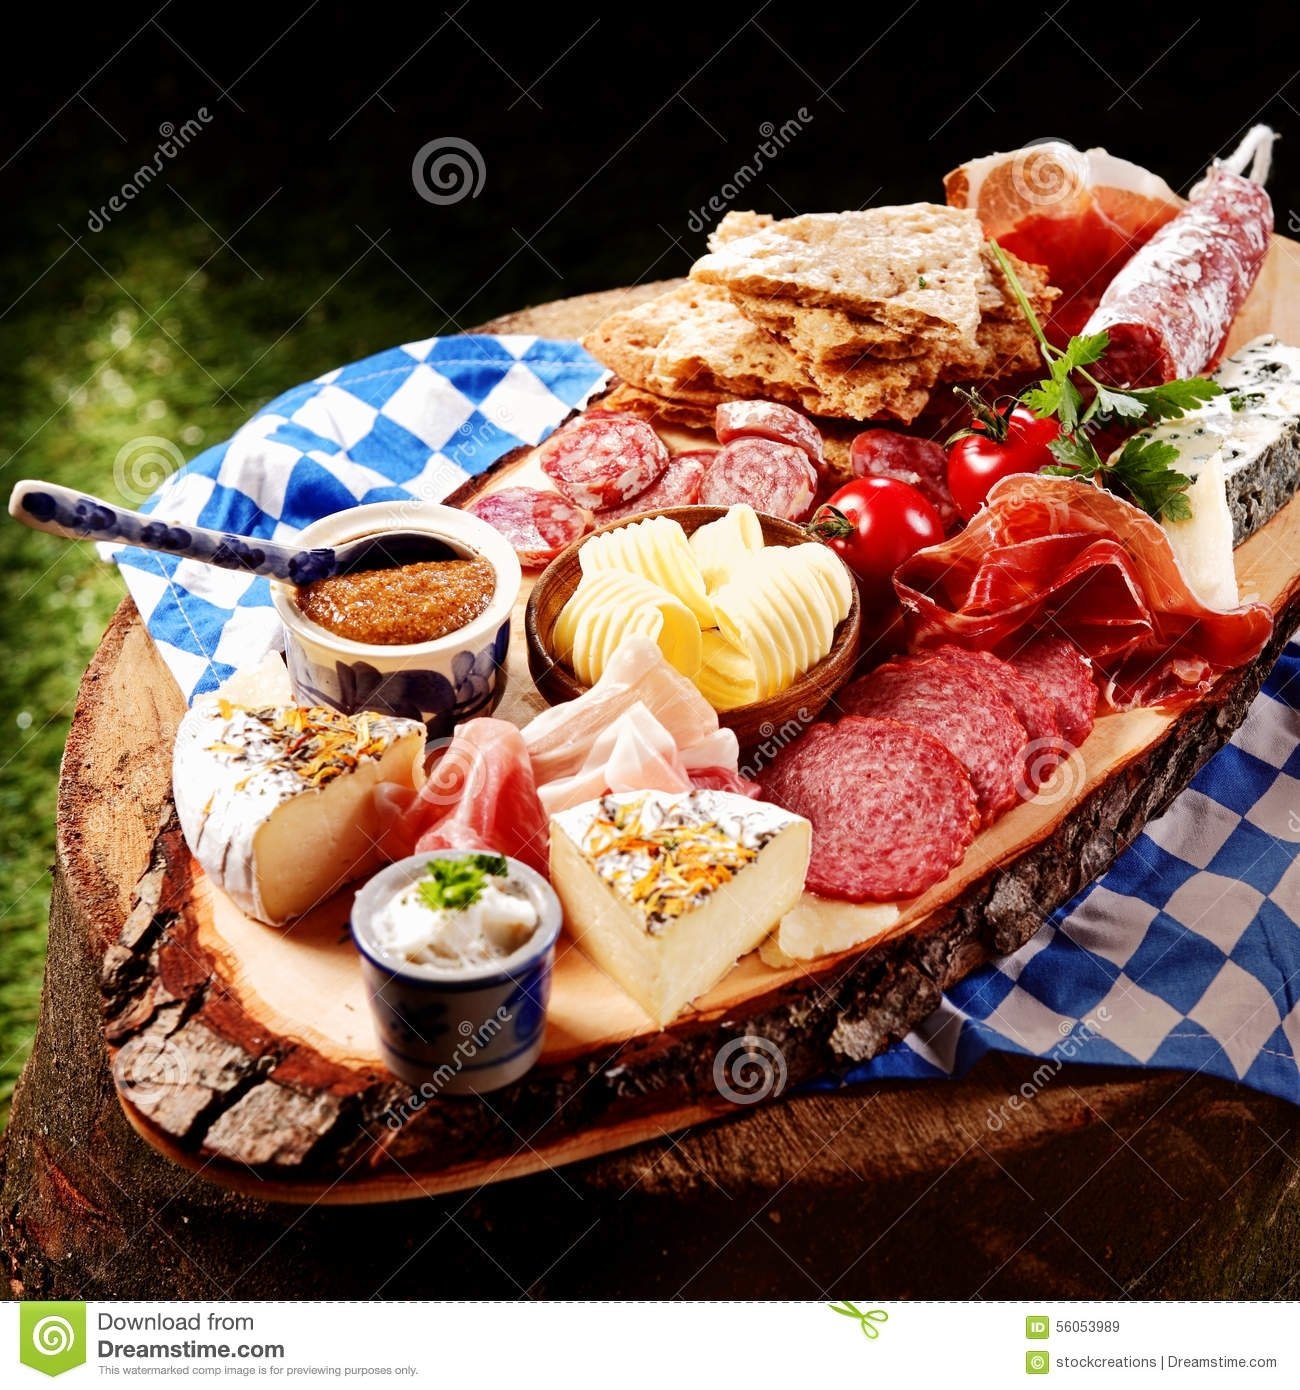 10 Unique Meat And Cheese Tray Ideas oktoberfest meat and cheese platter with bread stock image image 2023